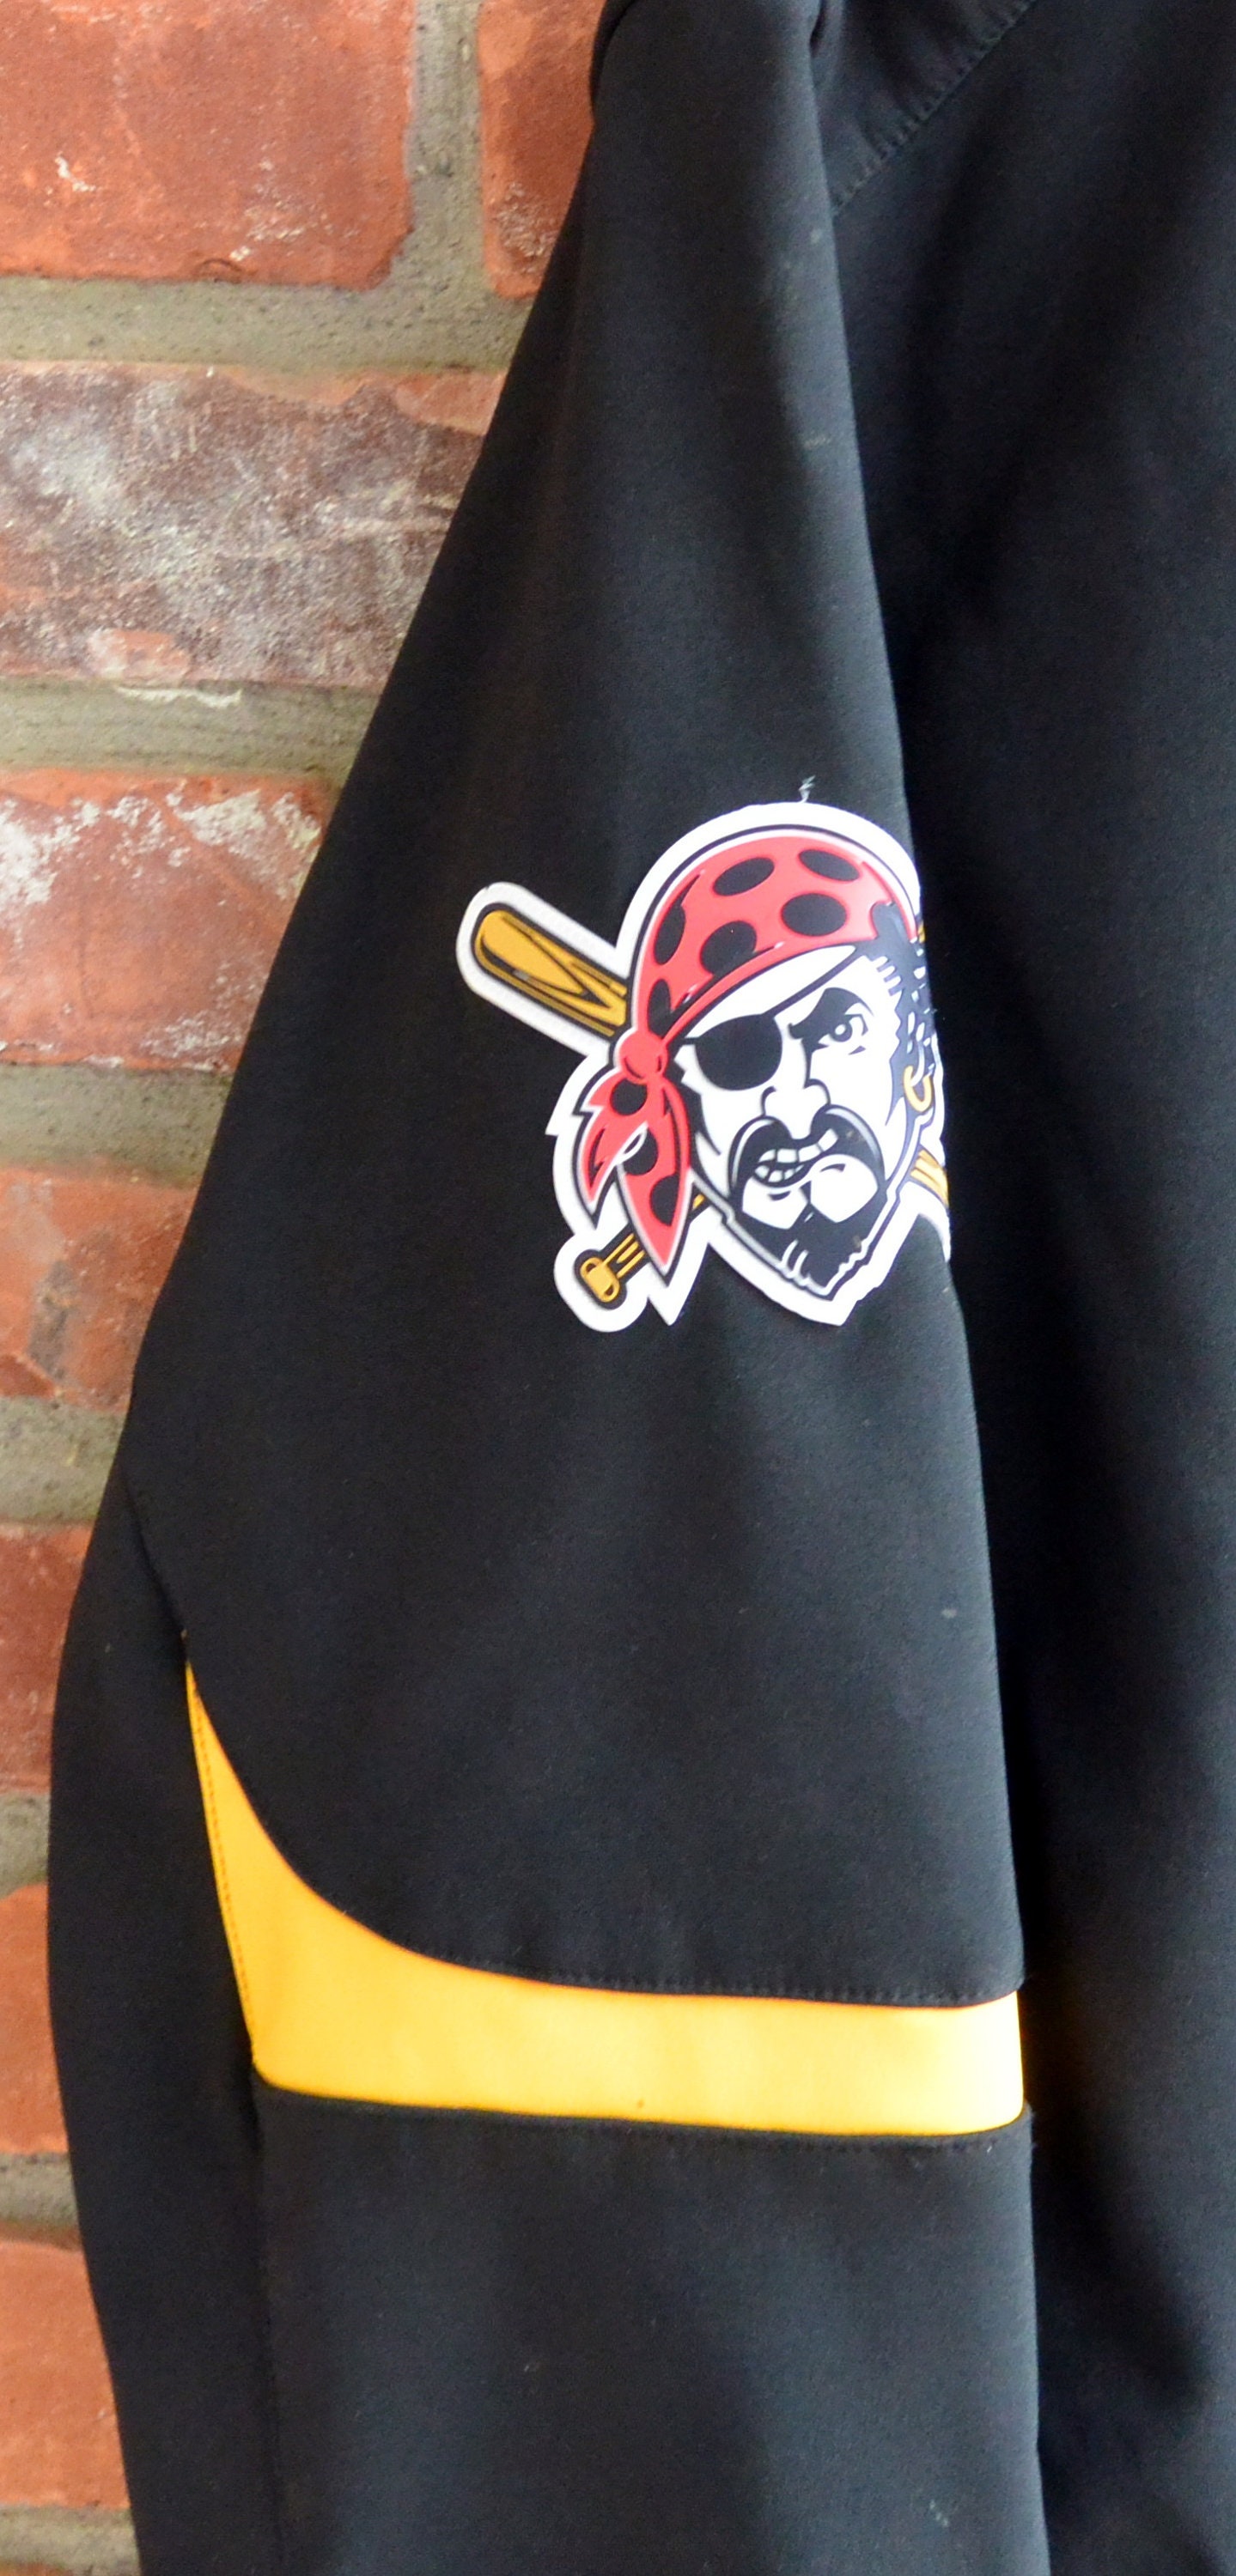 Authentic BP Jacket Pittsburgh Pirates 1987